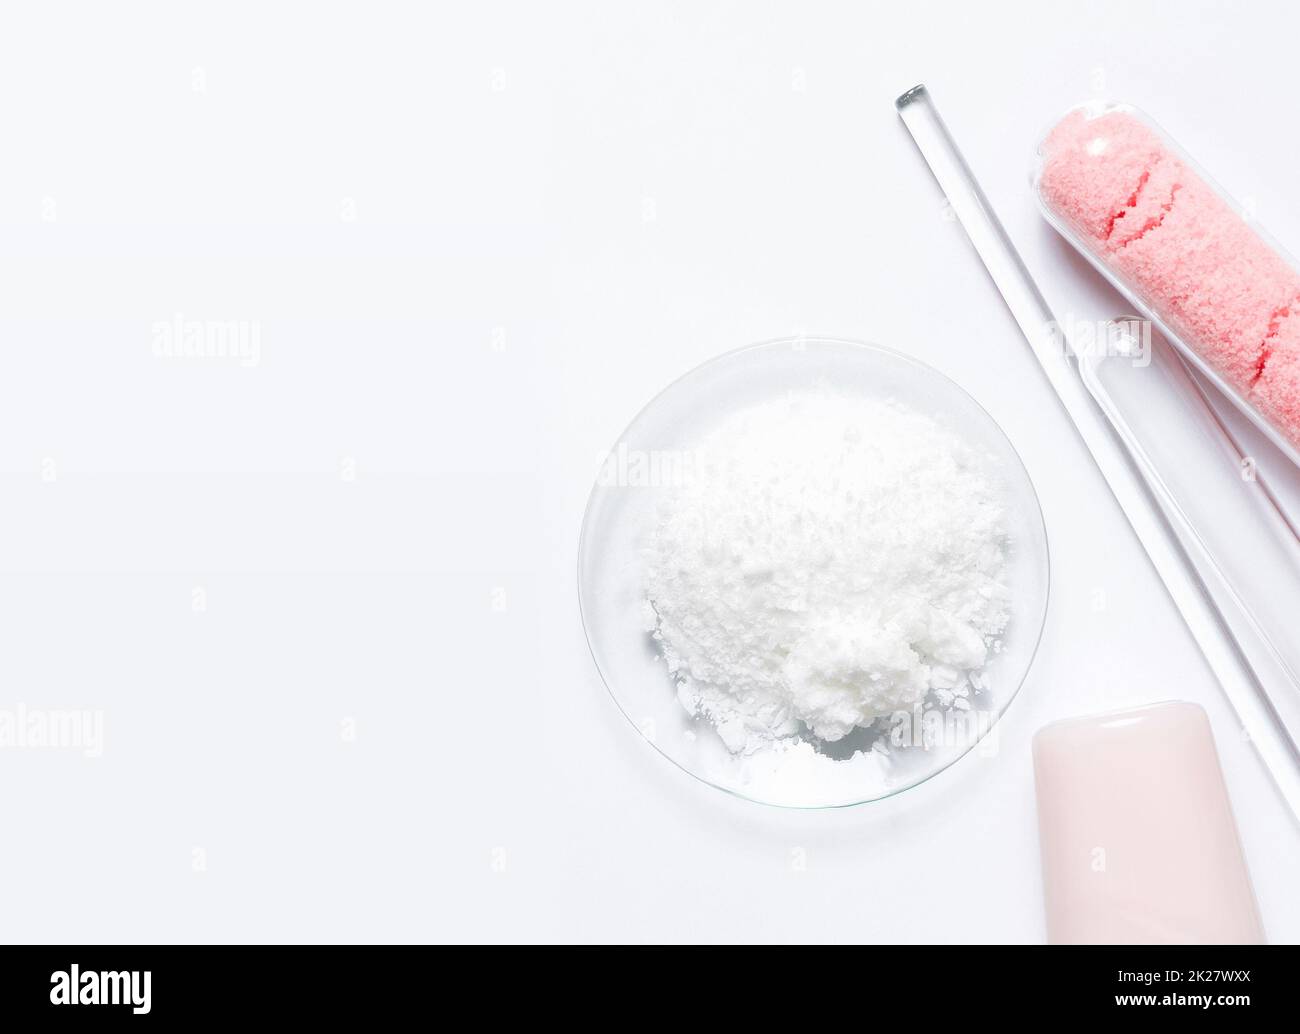 Beauty care cream, himalayan pink salt and Polyacrylic acid powder placed next to Stirring Rod and Test tube. Chemicals for beauty care on white laboratory table. (Top View) Stock Photo